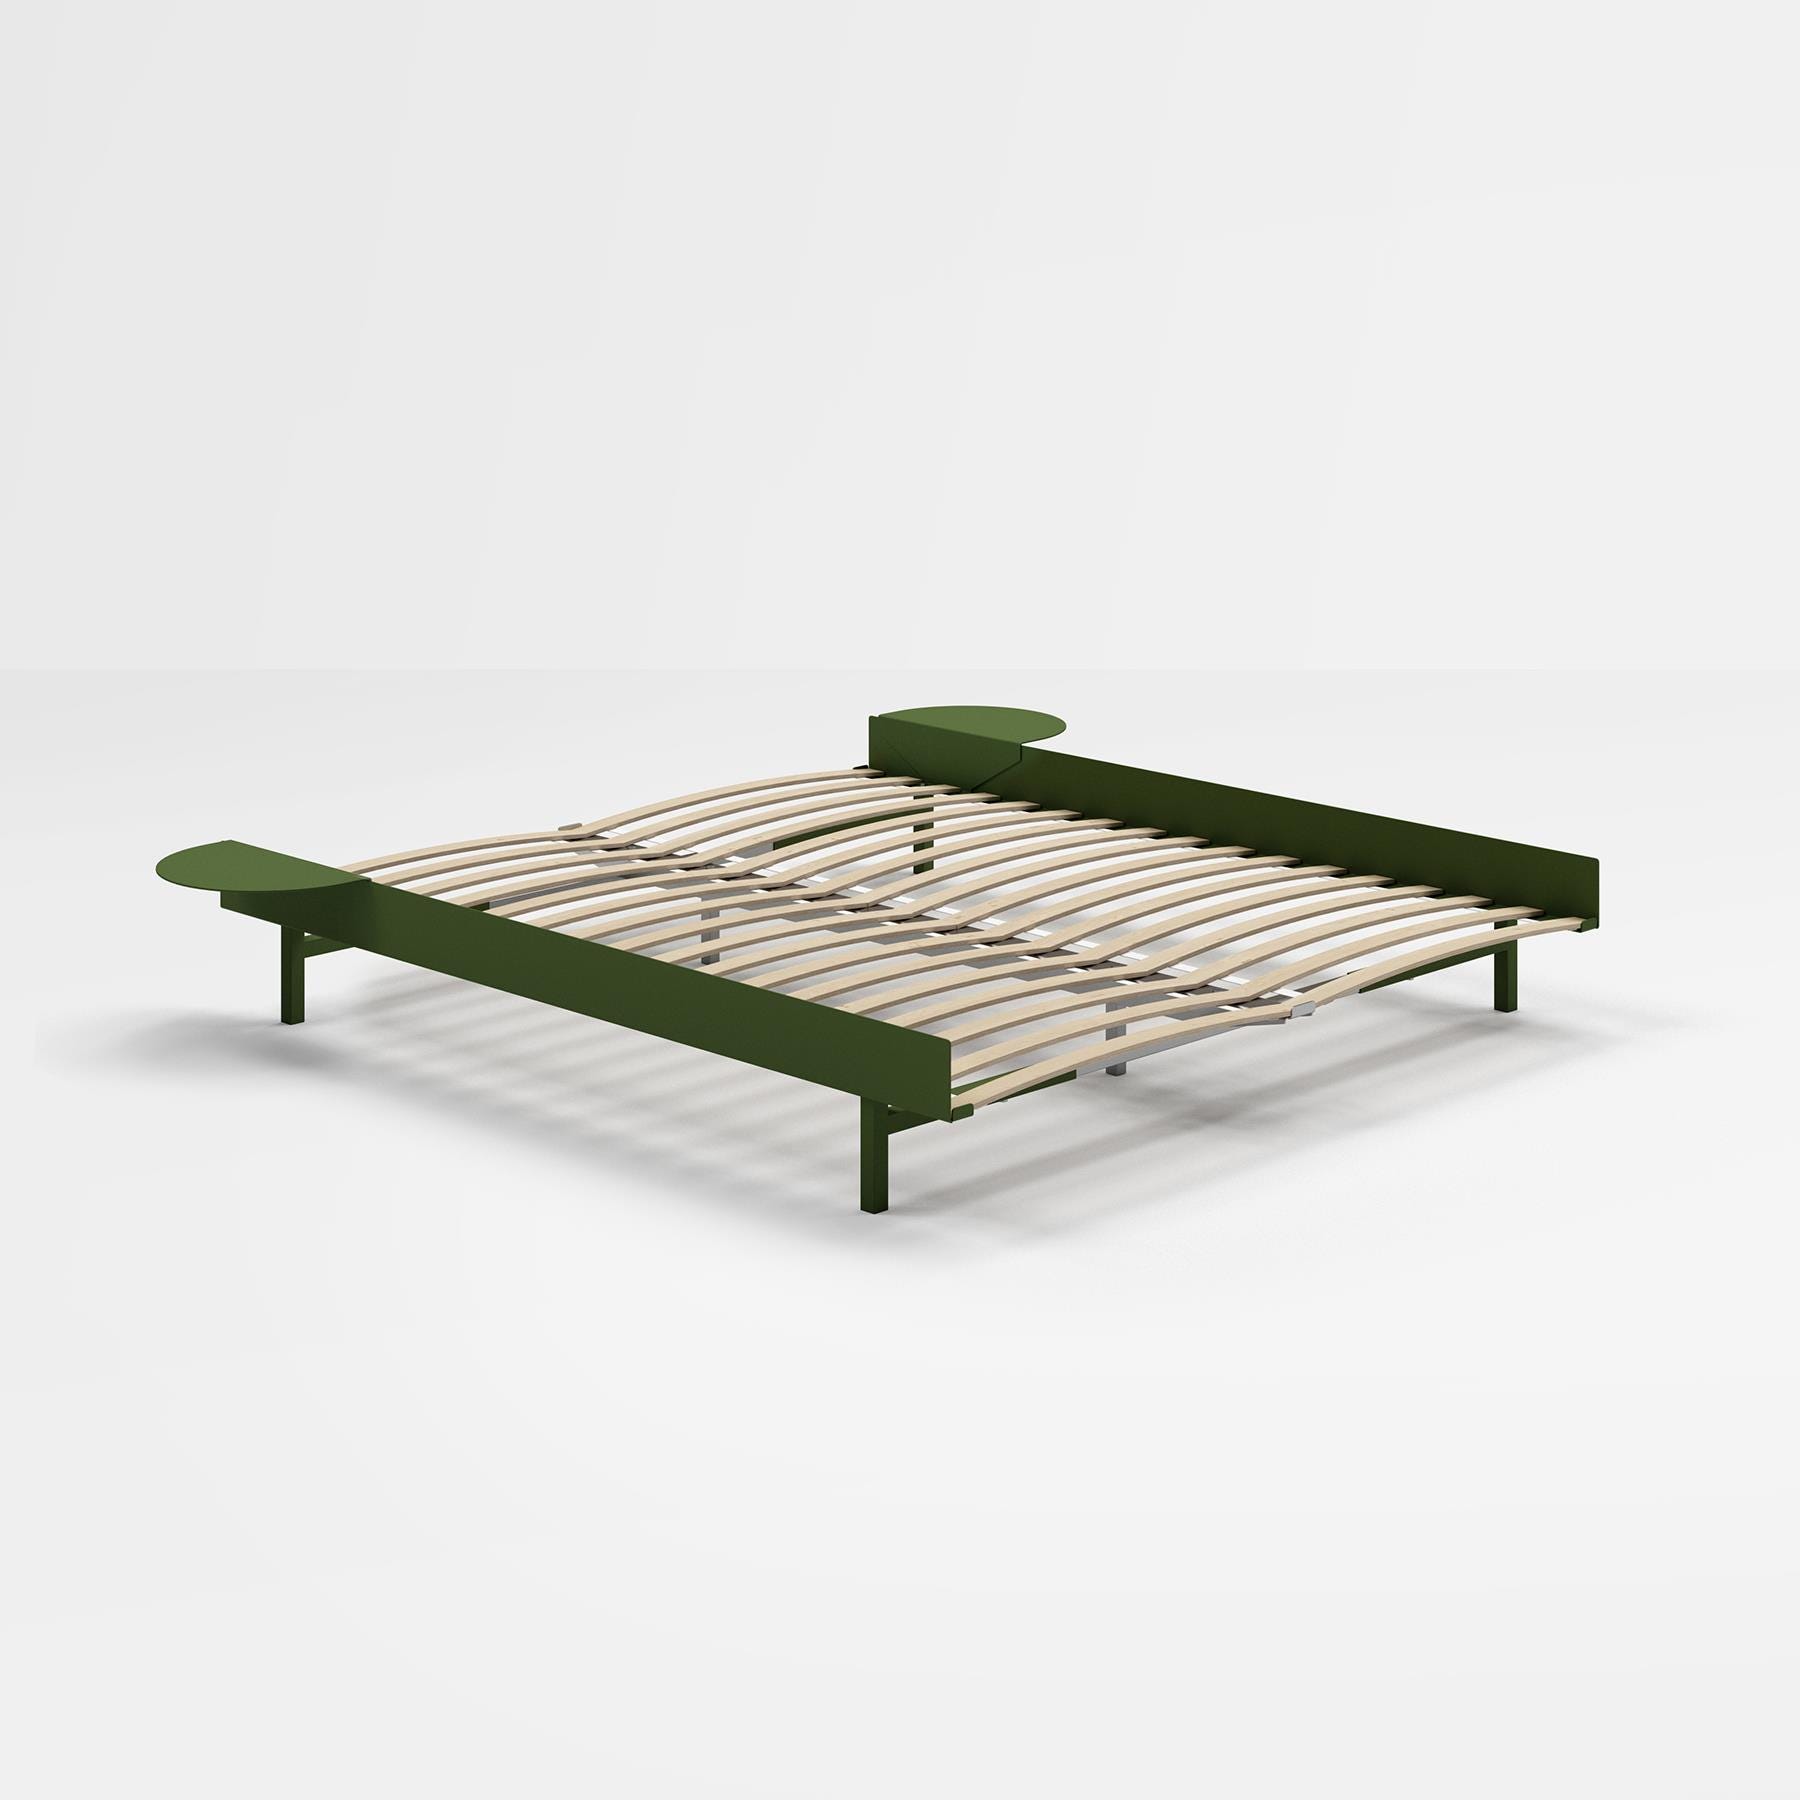 Moebe Bed King Pine Green 2 Side Tables Green Designer Furniture From Holloways Of Ludlow